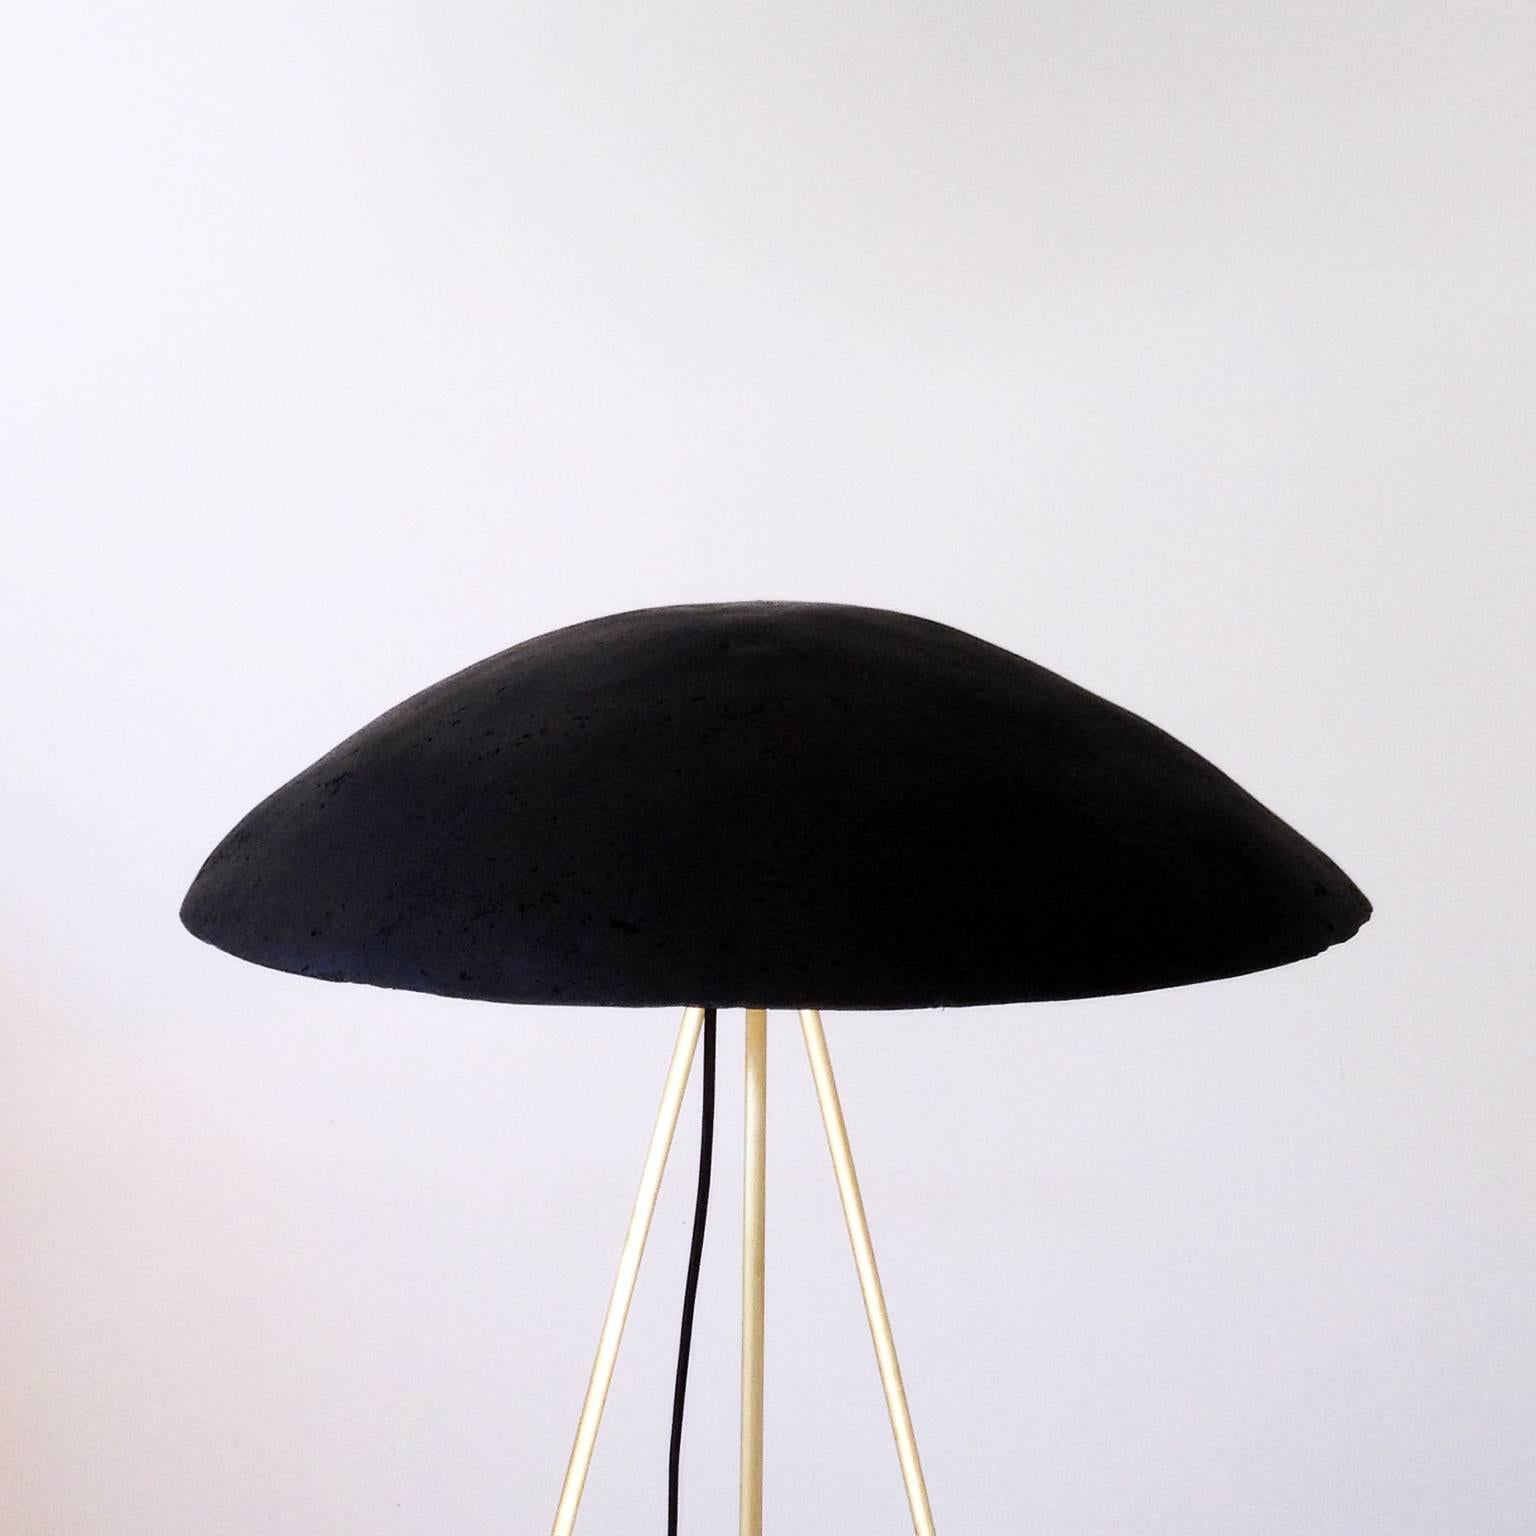 American Tall Buddy Floor Lamp with Concrete Noggin and Brass Tripod Legs